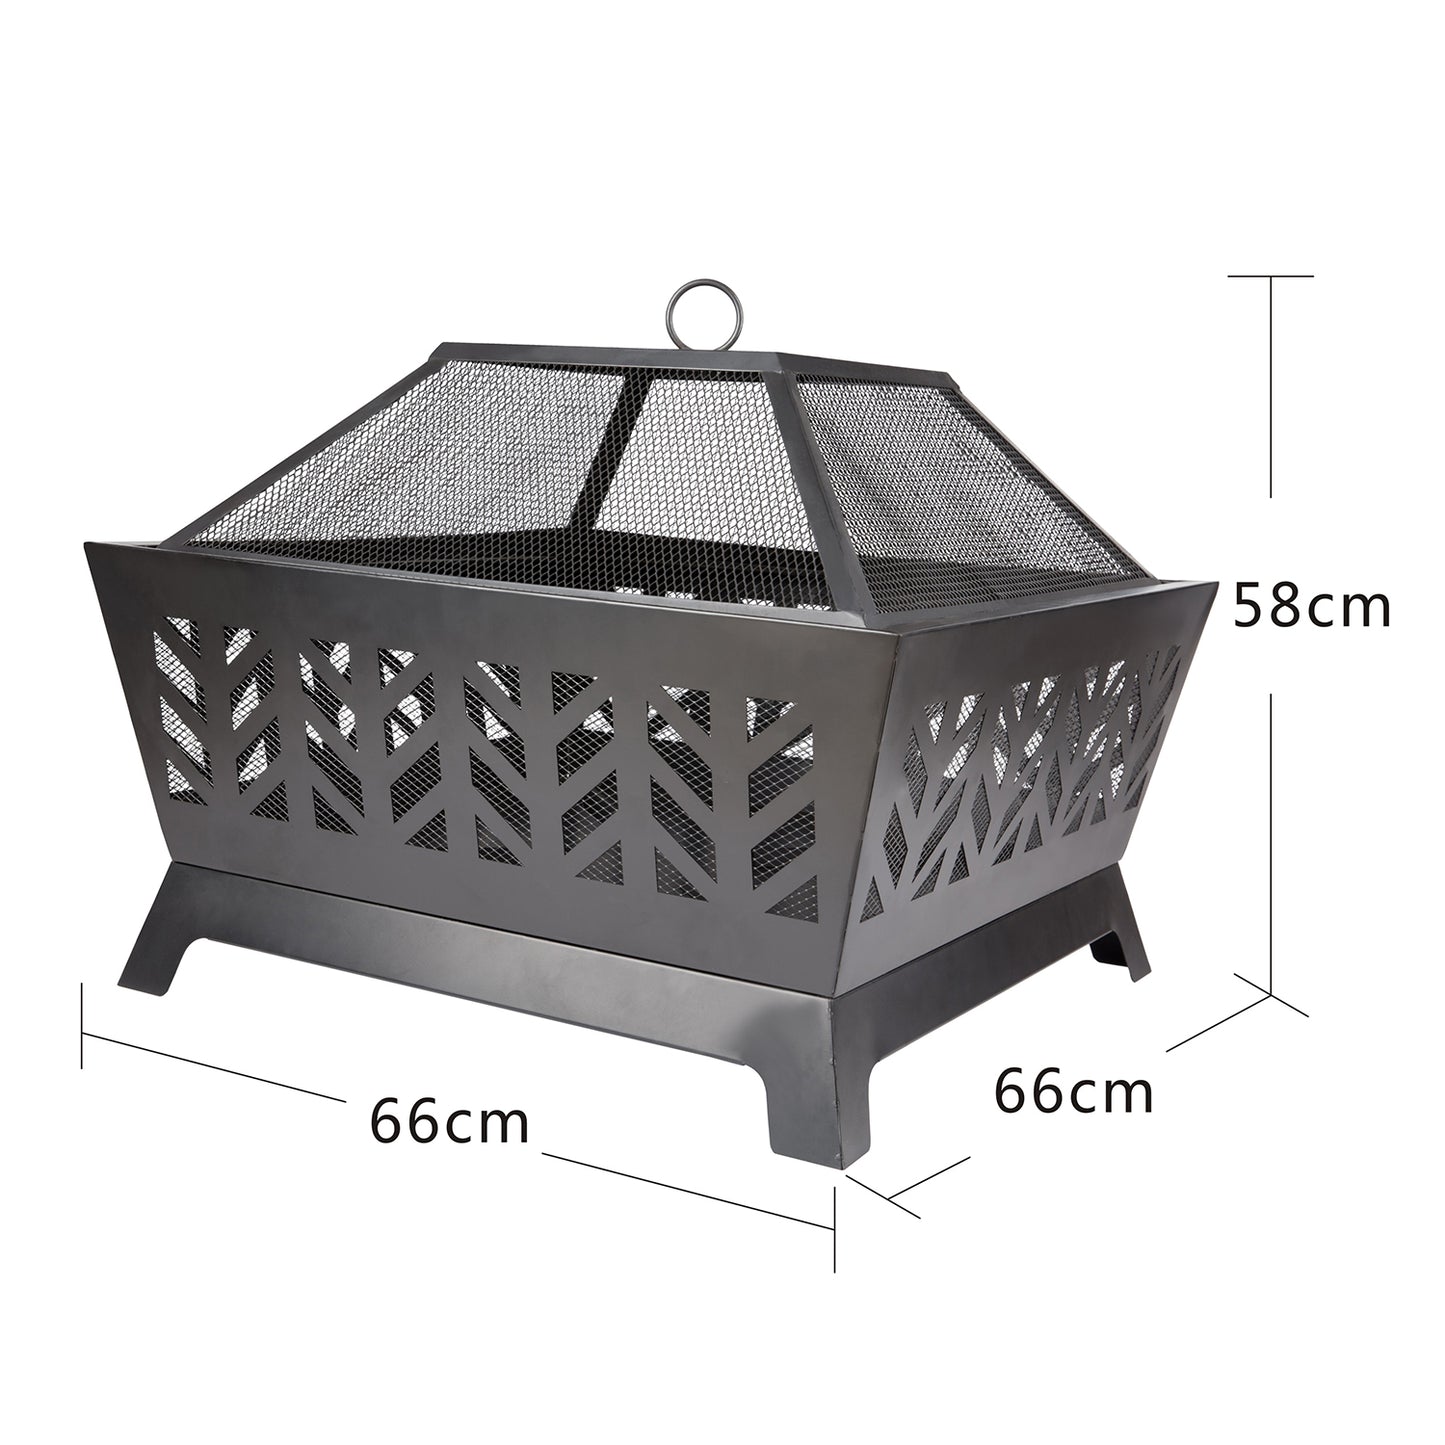 Wood burning fire pit in steel structure